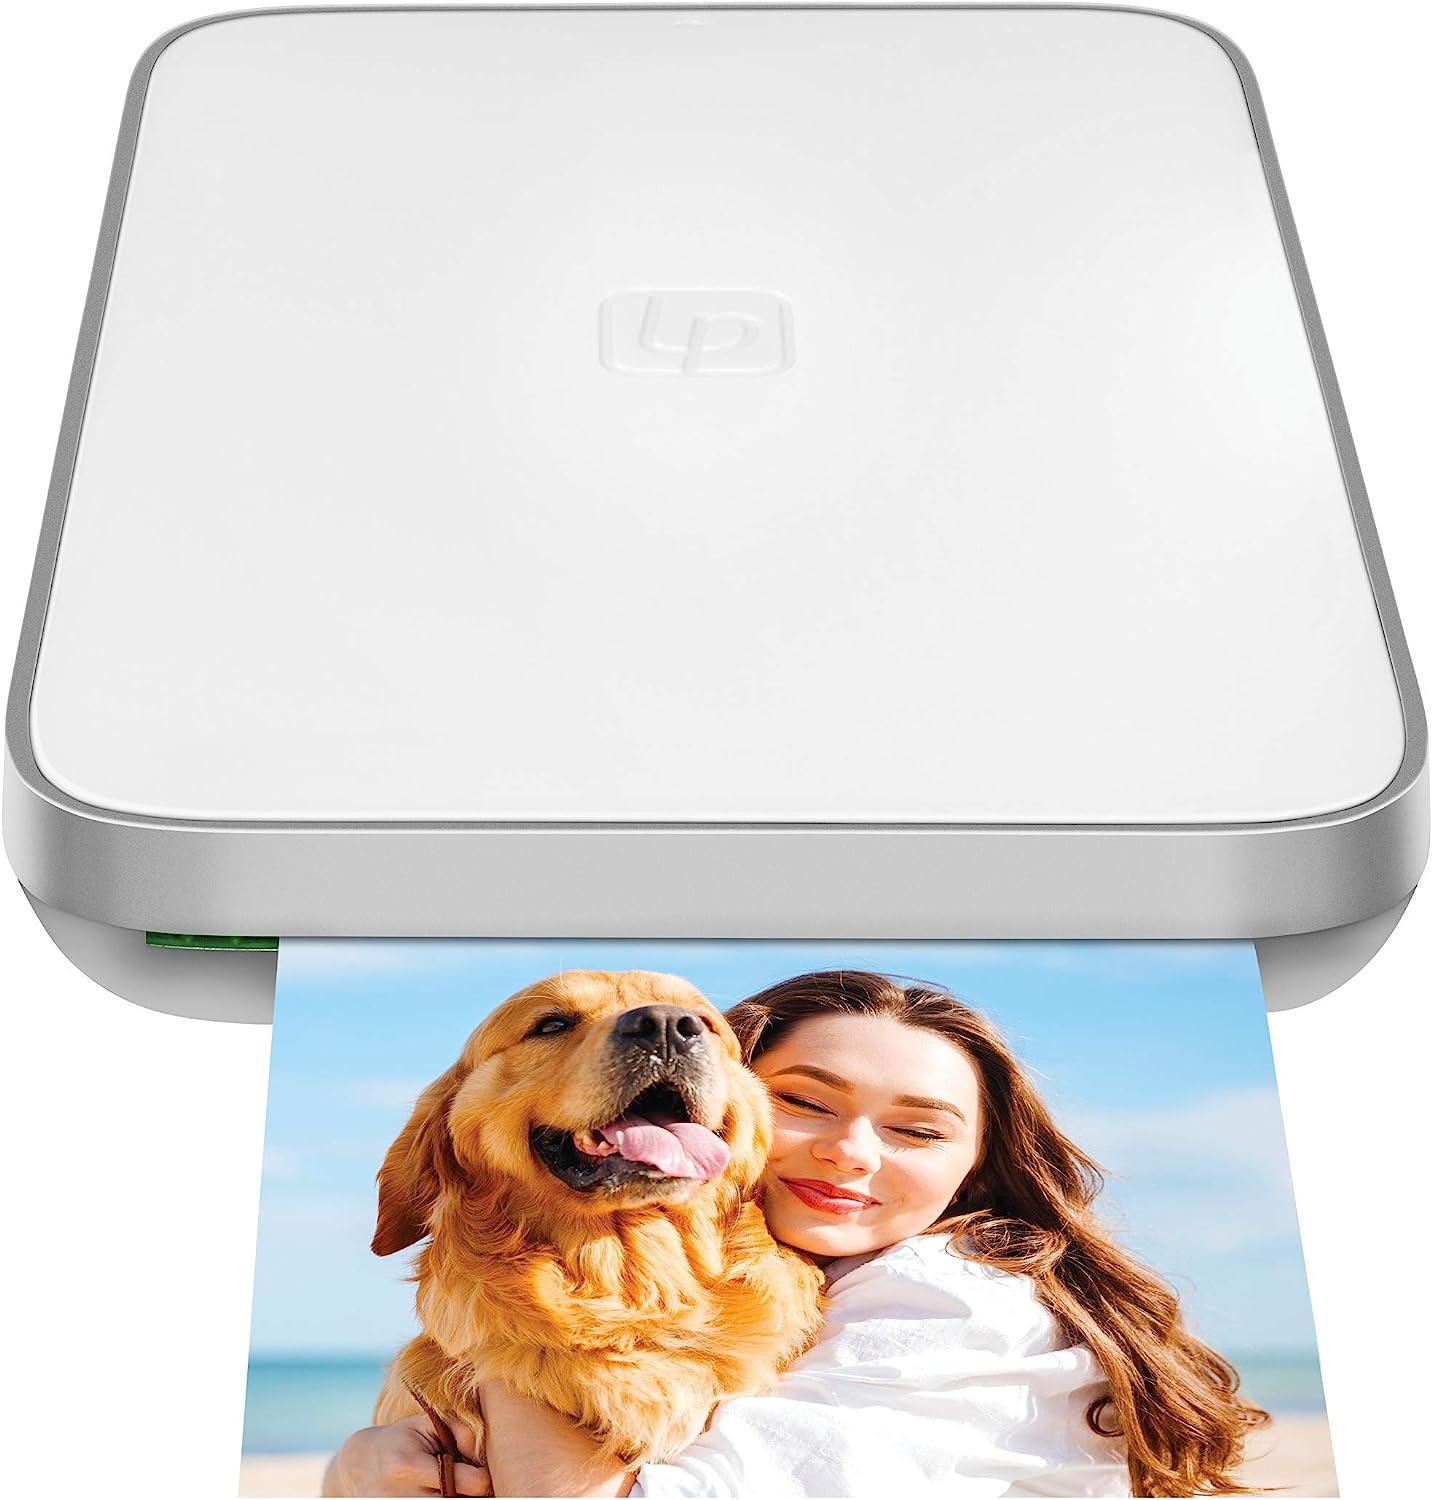 Lifeprint 3x4.5 Portable Photo and Video Printer, Portable Printer for iPhone and Android